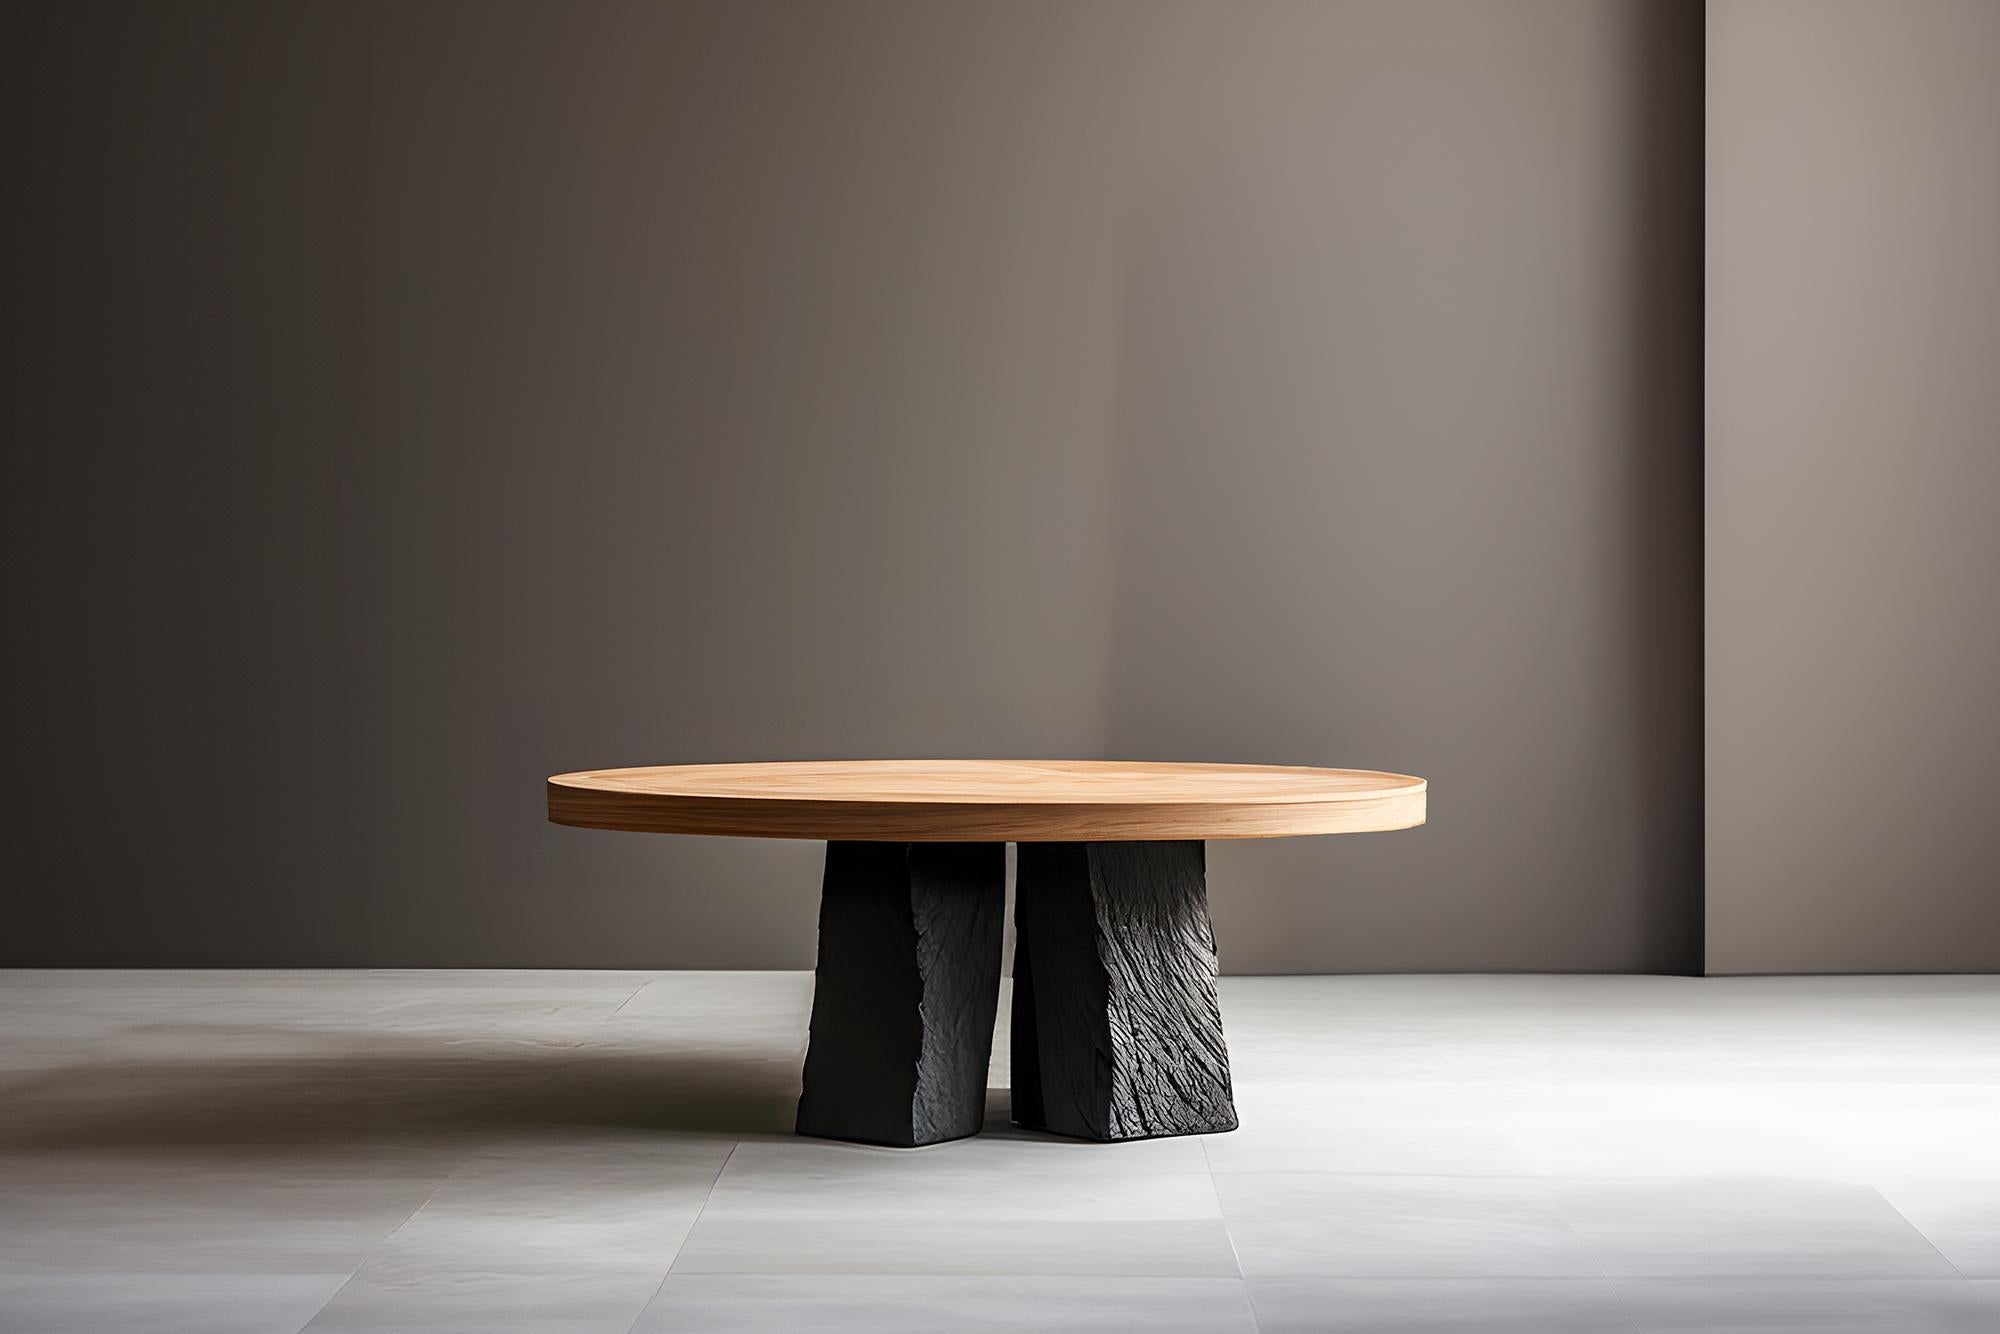 Round Wood Fundamenta Coffee 54 Sleek Geometry, Walnut Craft by NONO


Sculptural coffee table made of solid wood with a natural water-based or black tinted finish. Due to the nature of the production process, each piece may vary in grain, texture,